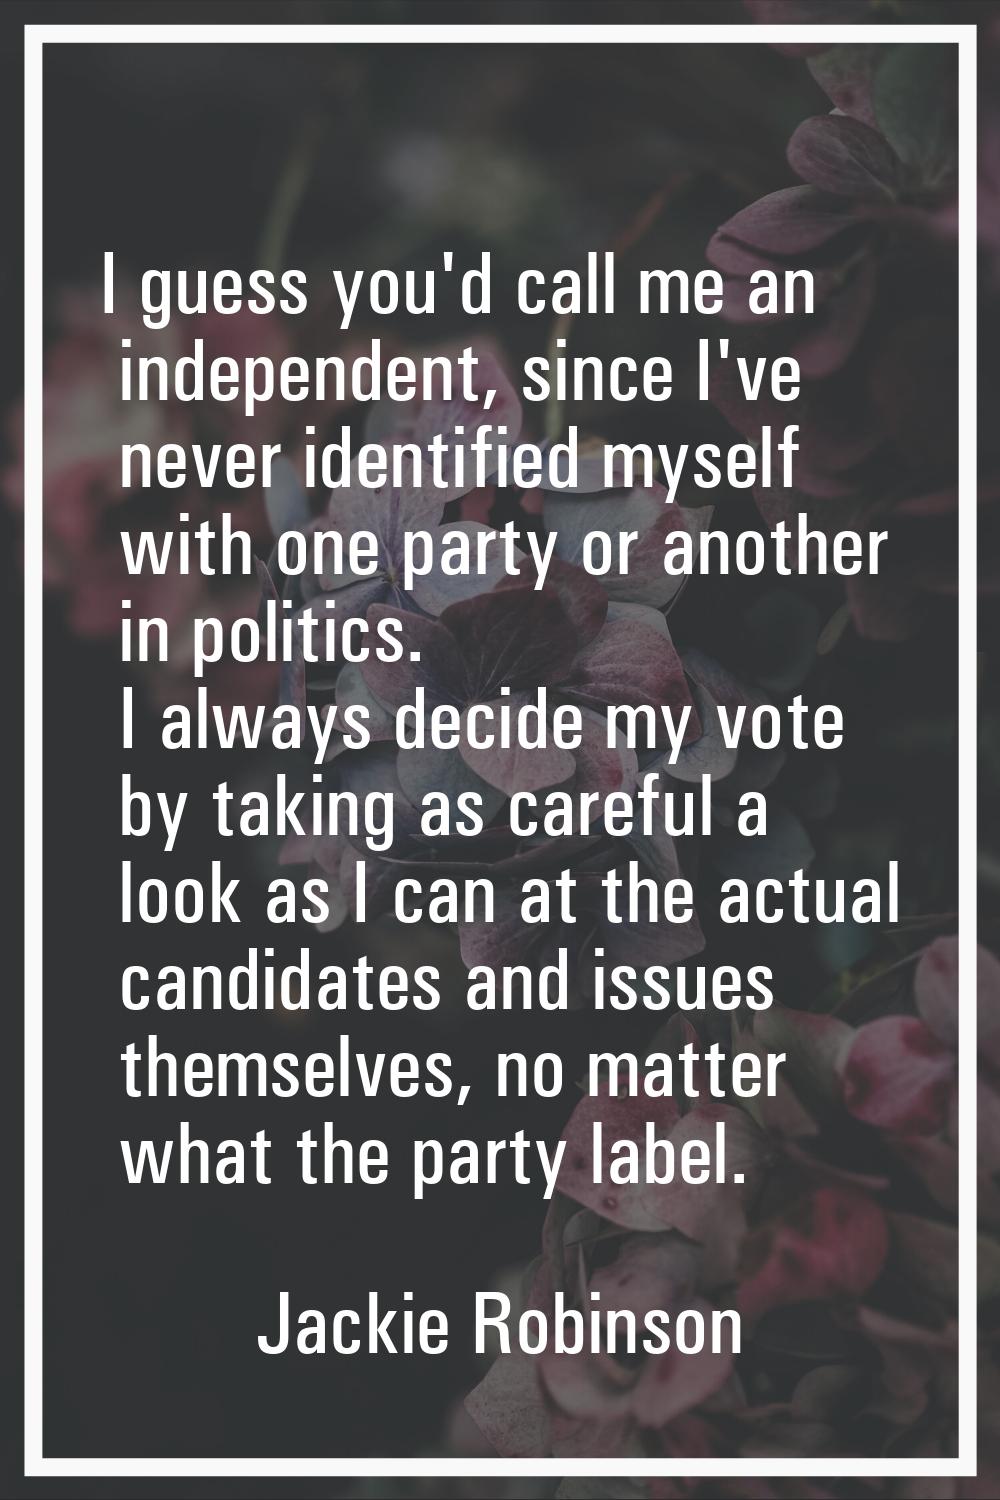 I guess you'd call me an independent, since I've never identified myself with one party or another 